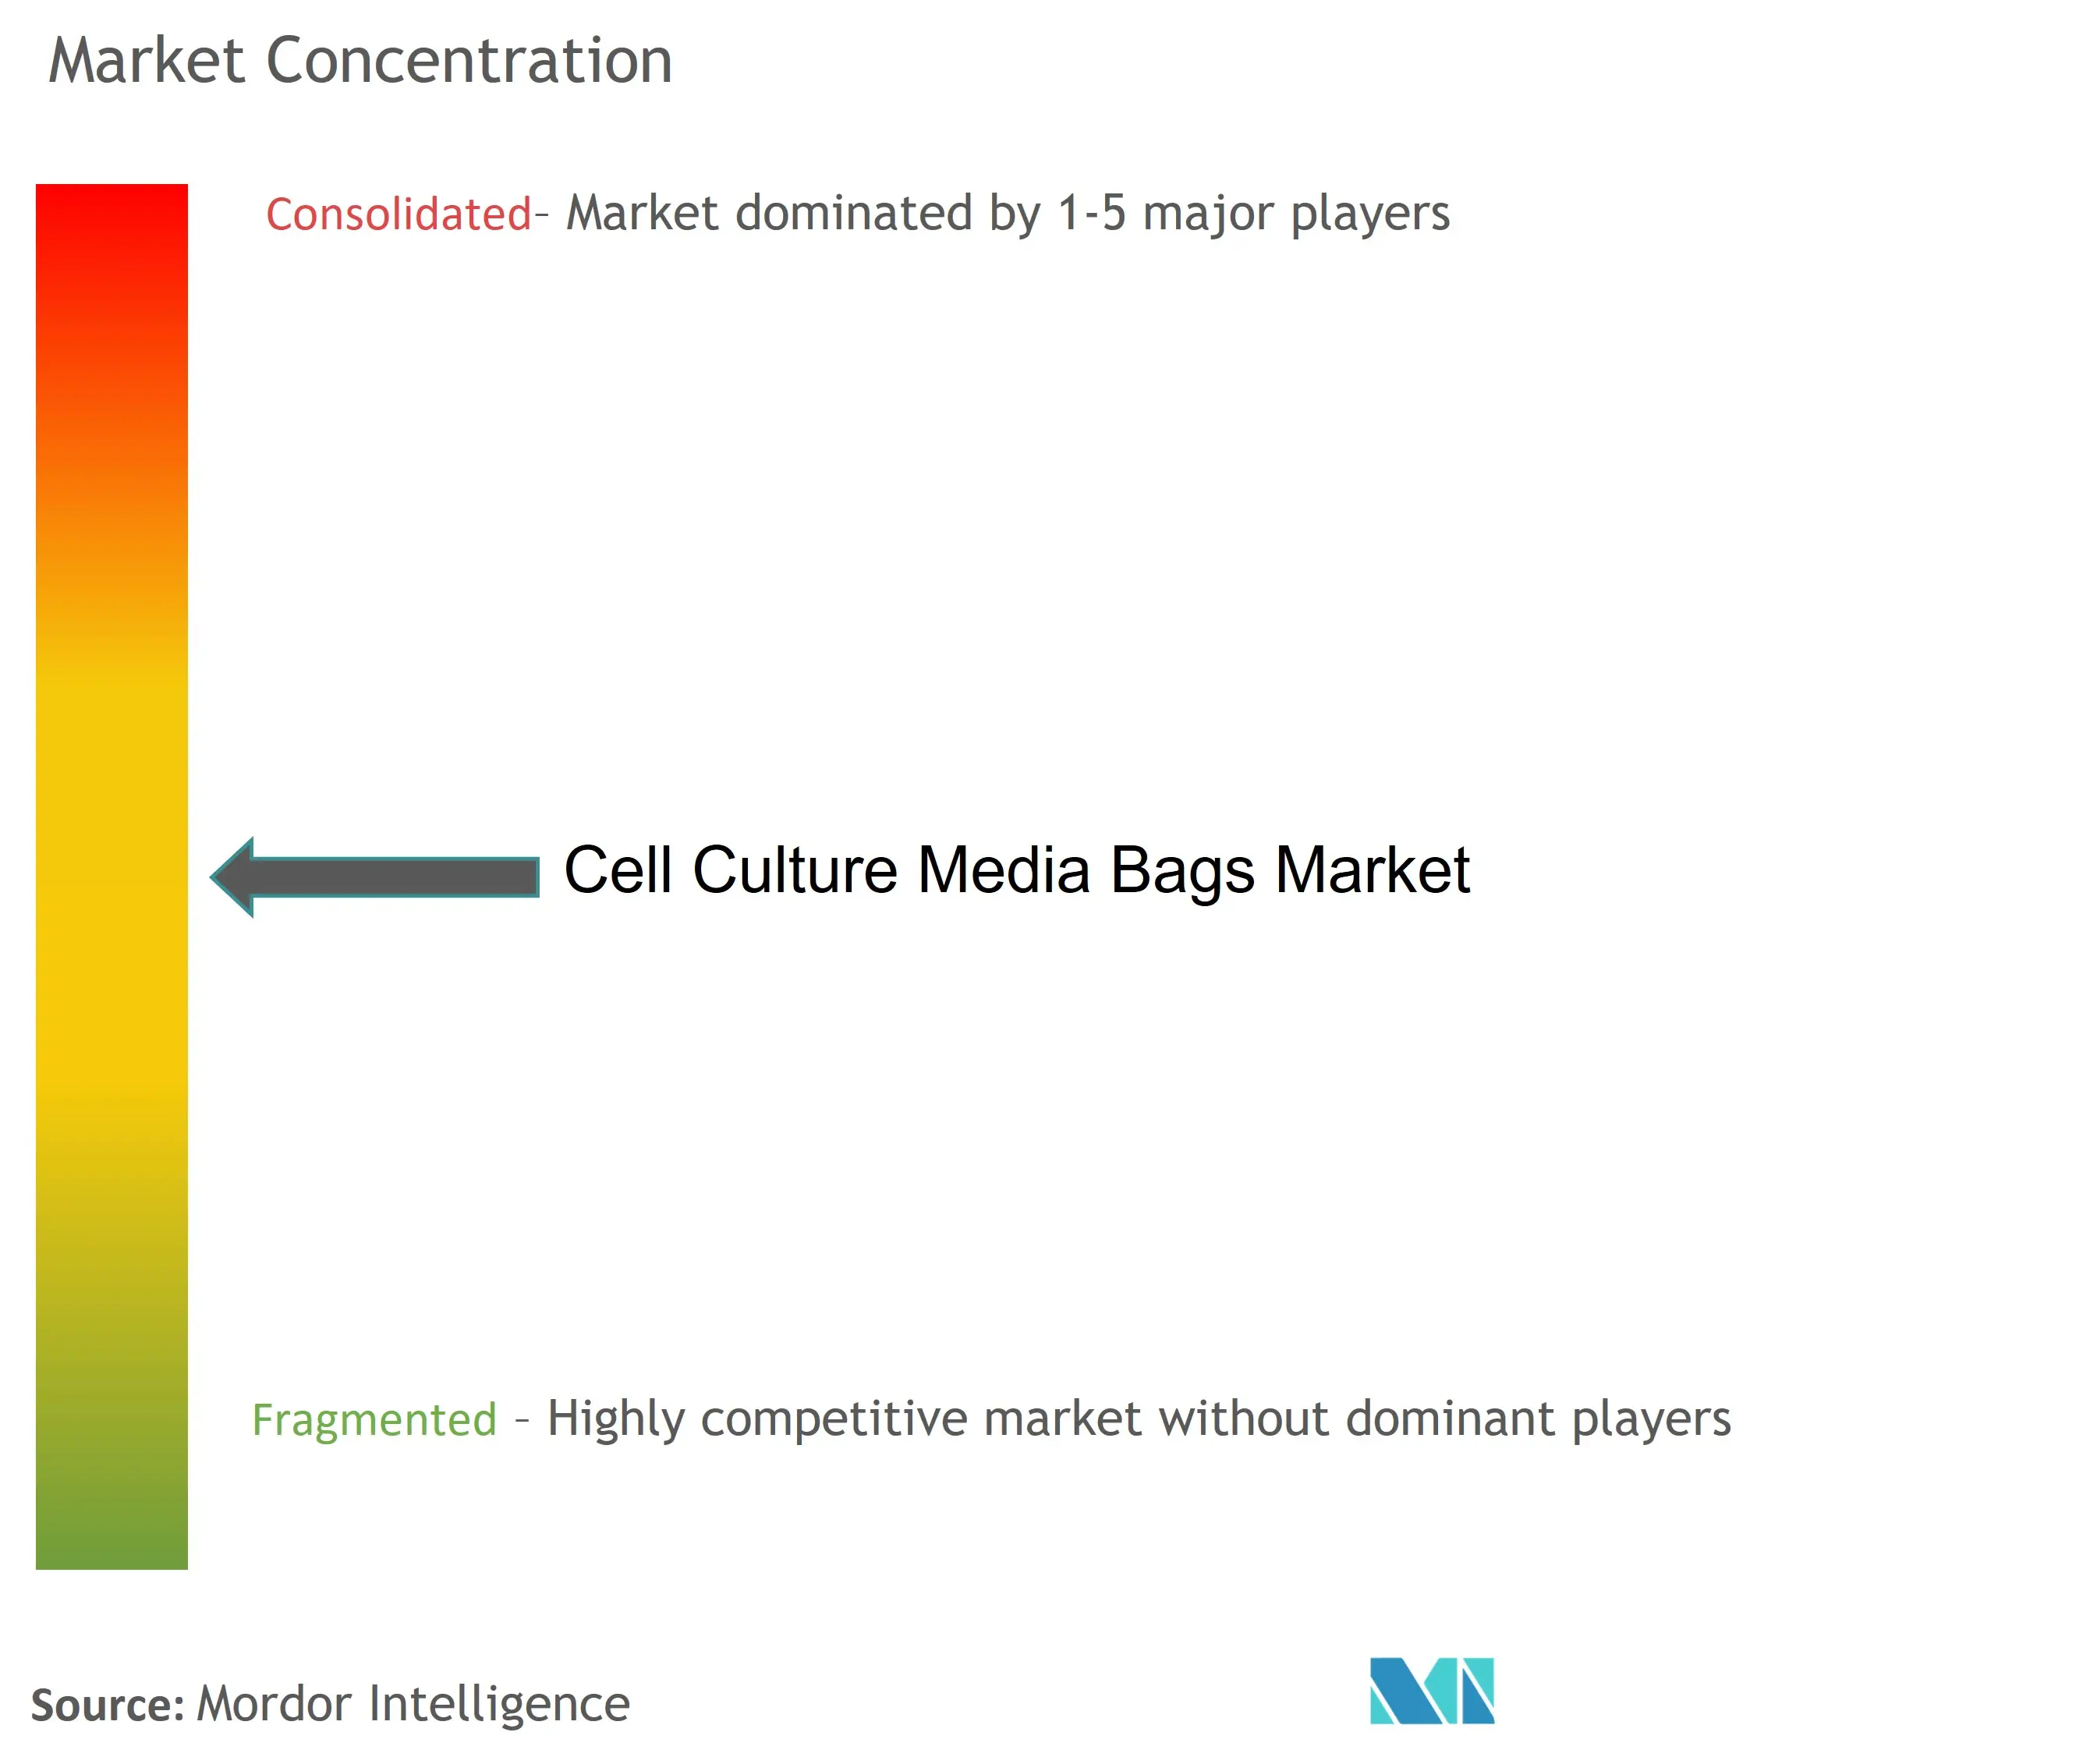 Cell Culture Media Bags Market Concentration